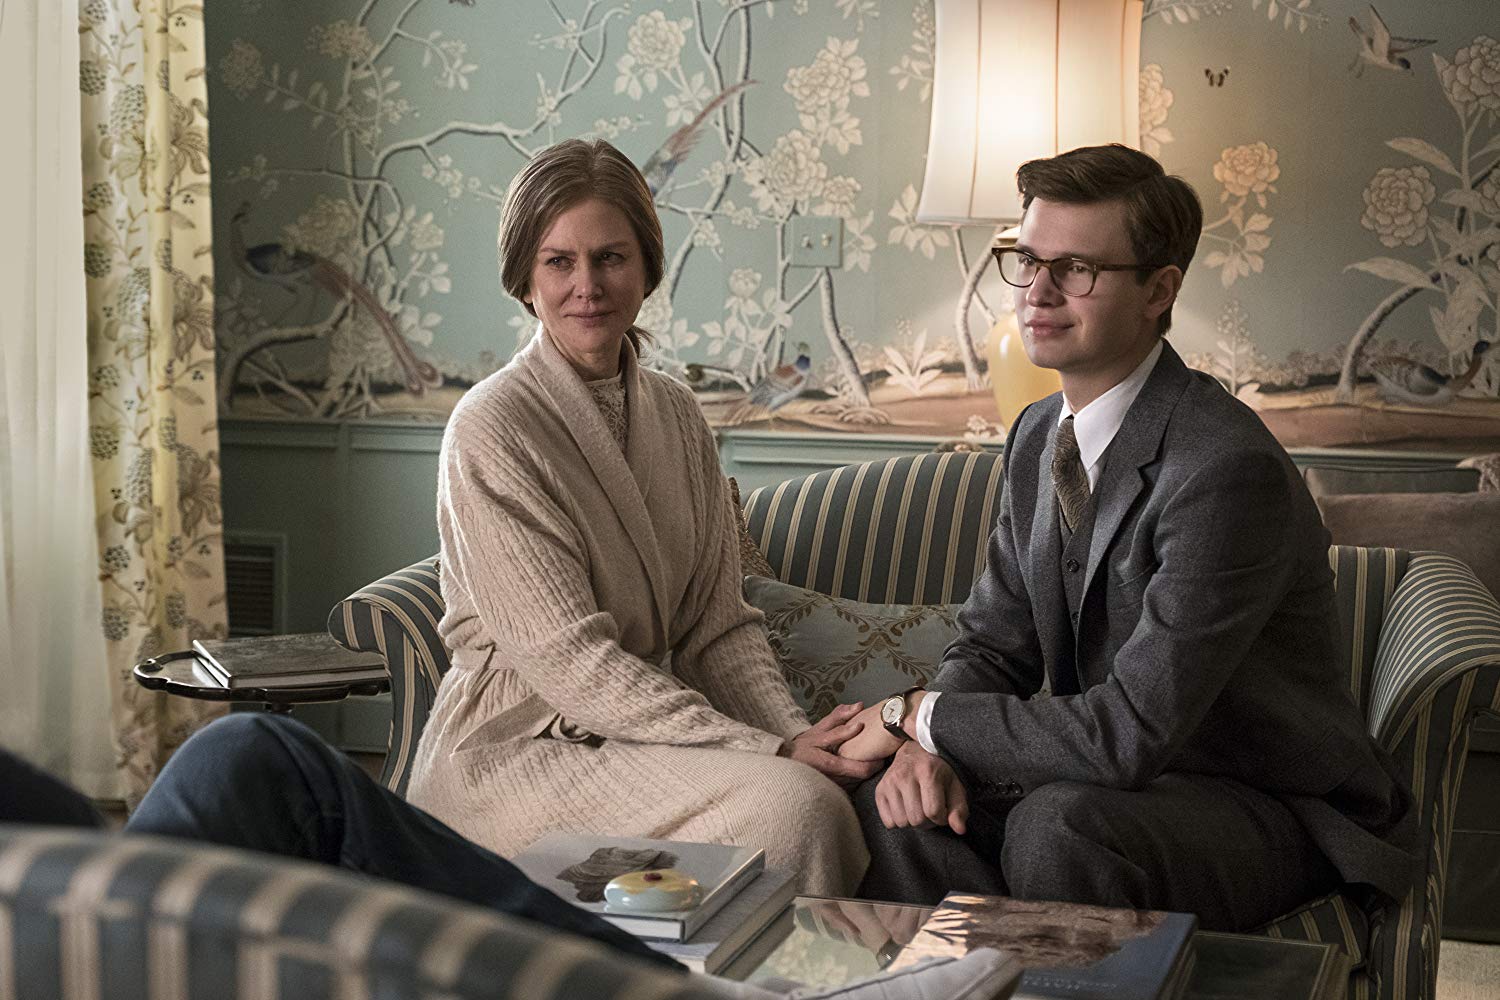 Nicole Kidman and Ansel Egort in The Goldfinch